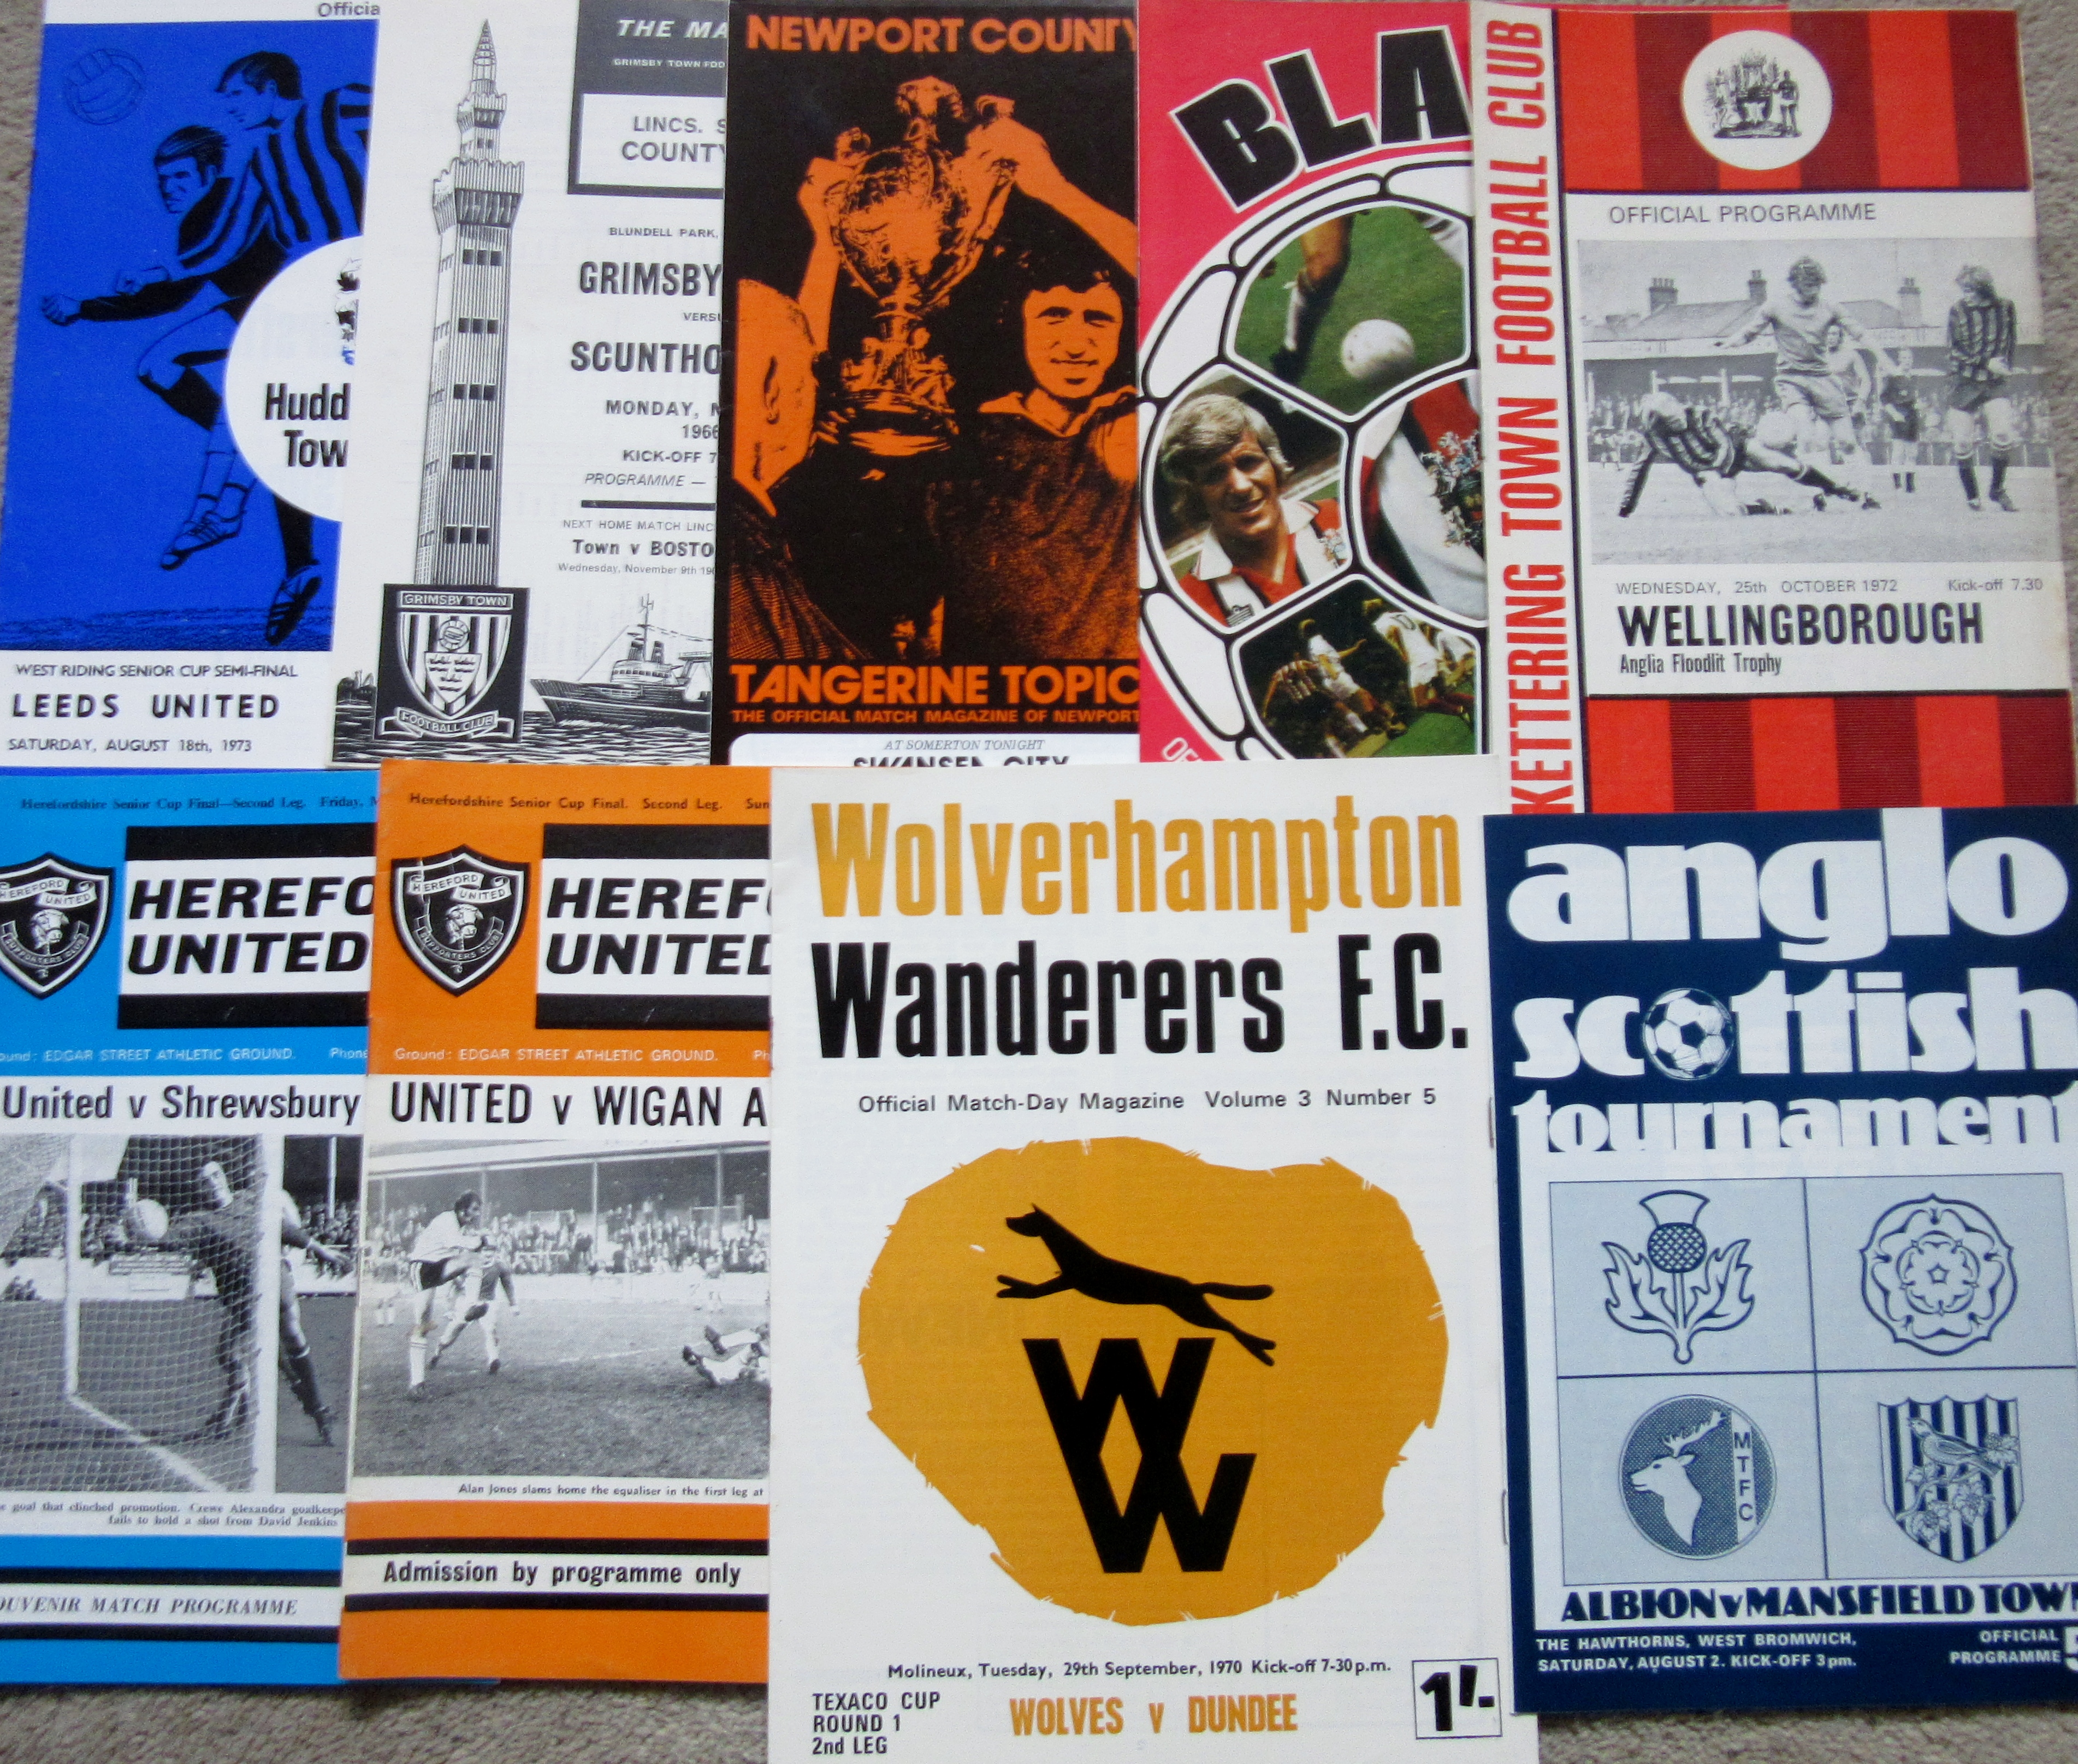 COLLECTION OF MINOR CUP PROGRAMMES - TEXACO, WATNEY, ANGLO ITALIAN ETC X 45 - Image 3 of 7